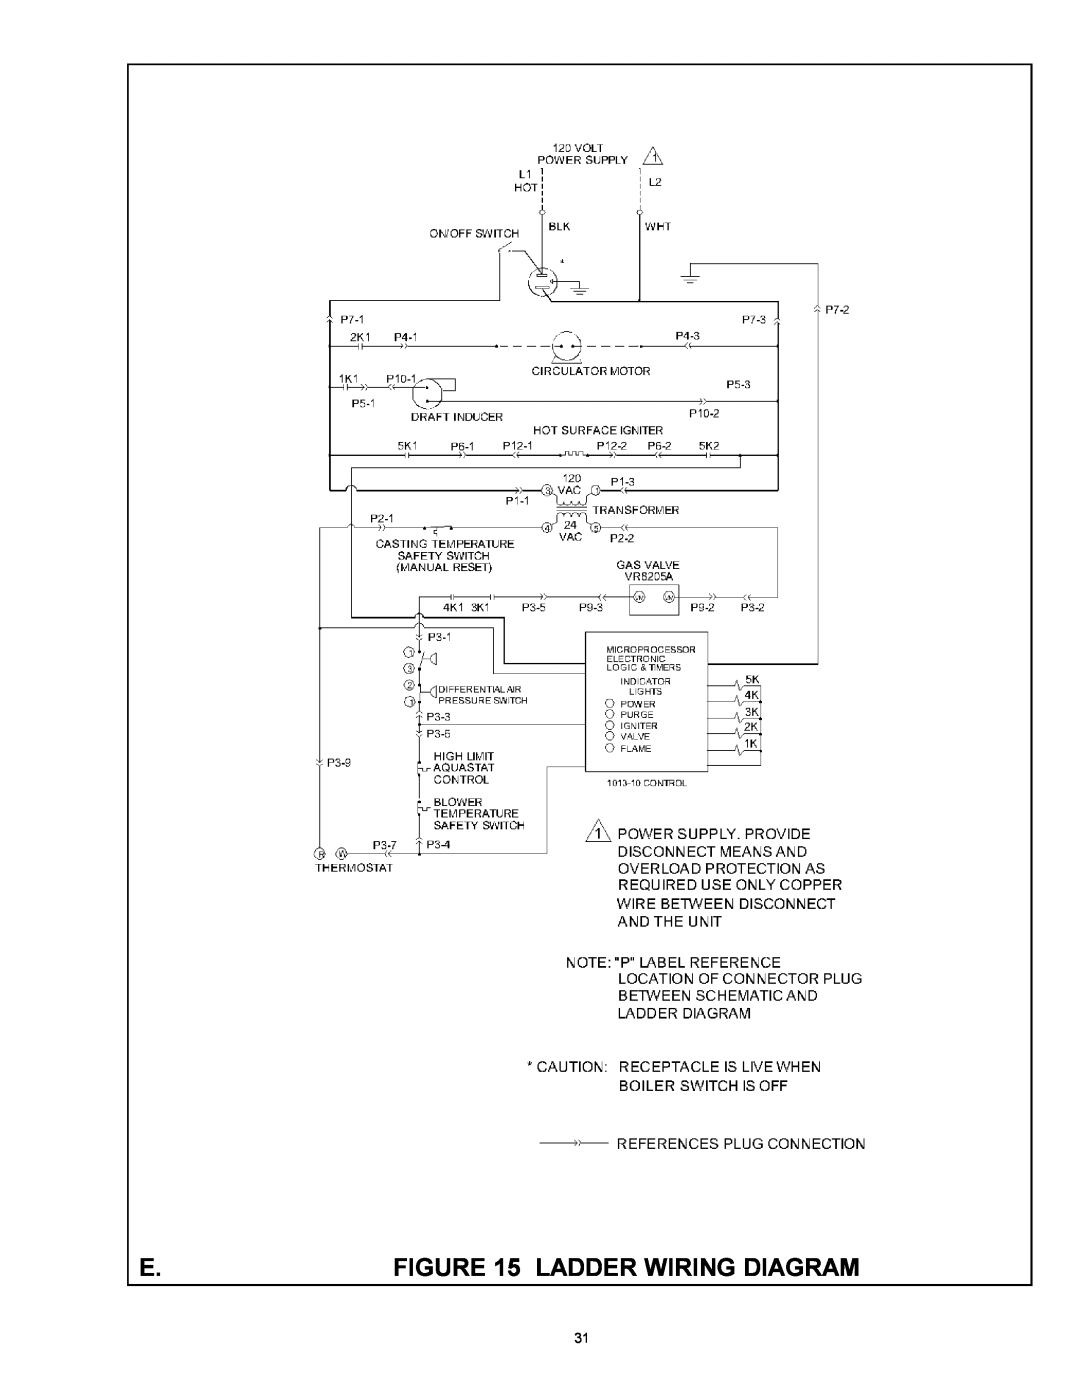 Quantum GAS-FIRED BOILERS installation instructions Ladder Wiring Diagram 